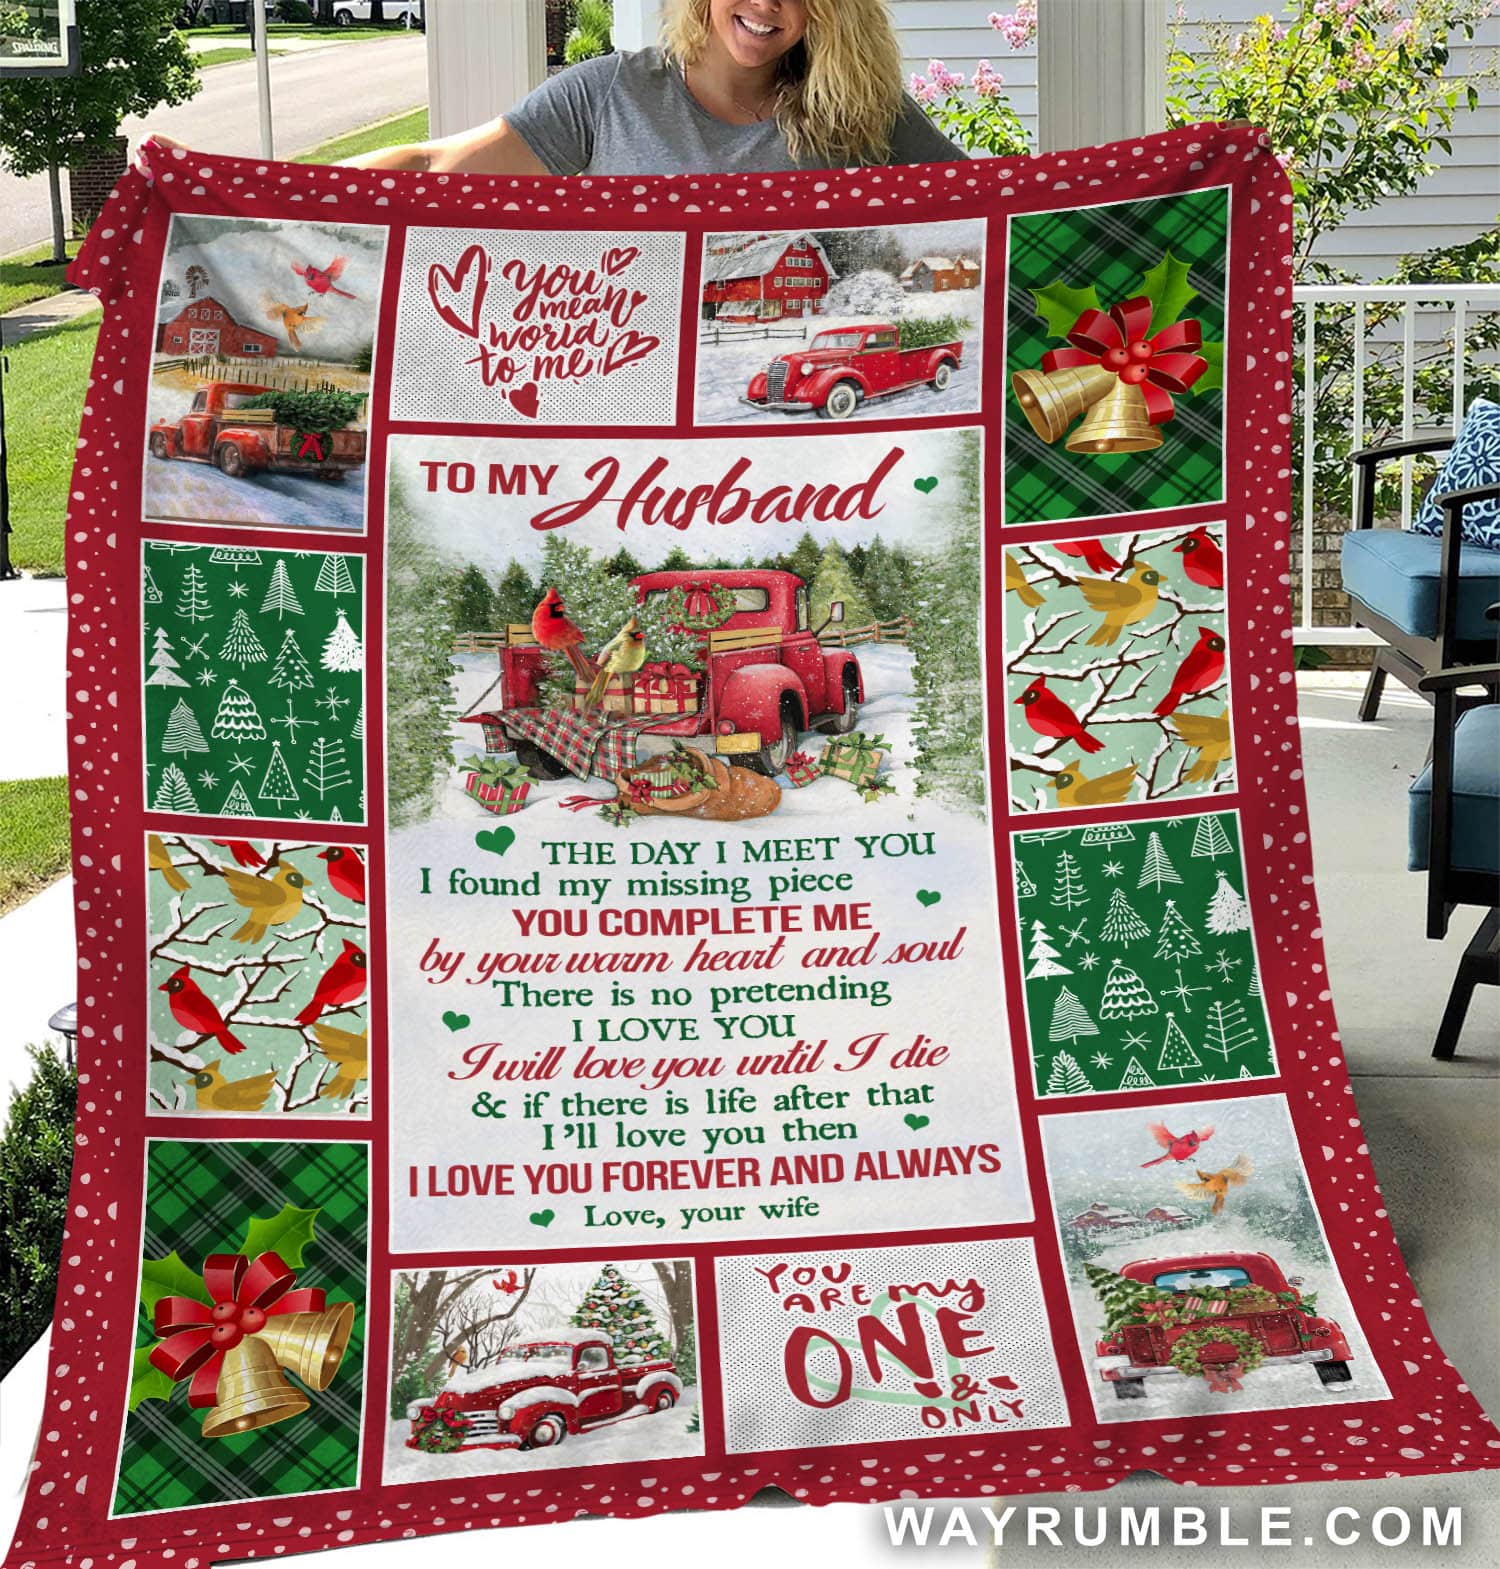 To my husband, Cardinal, Red truck, The day I meet you, I found my missing piece - Christmas, Couple Blanket